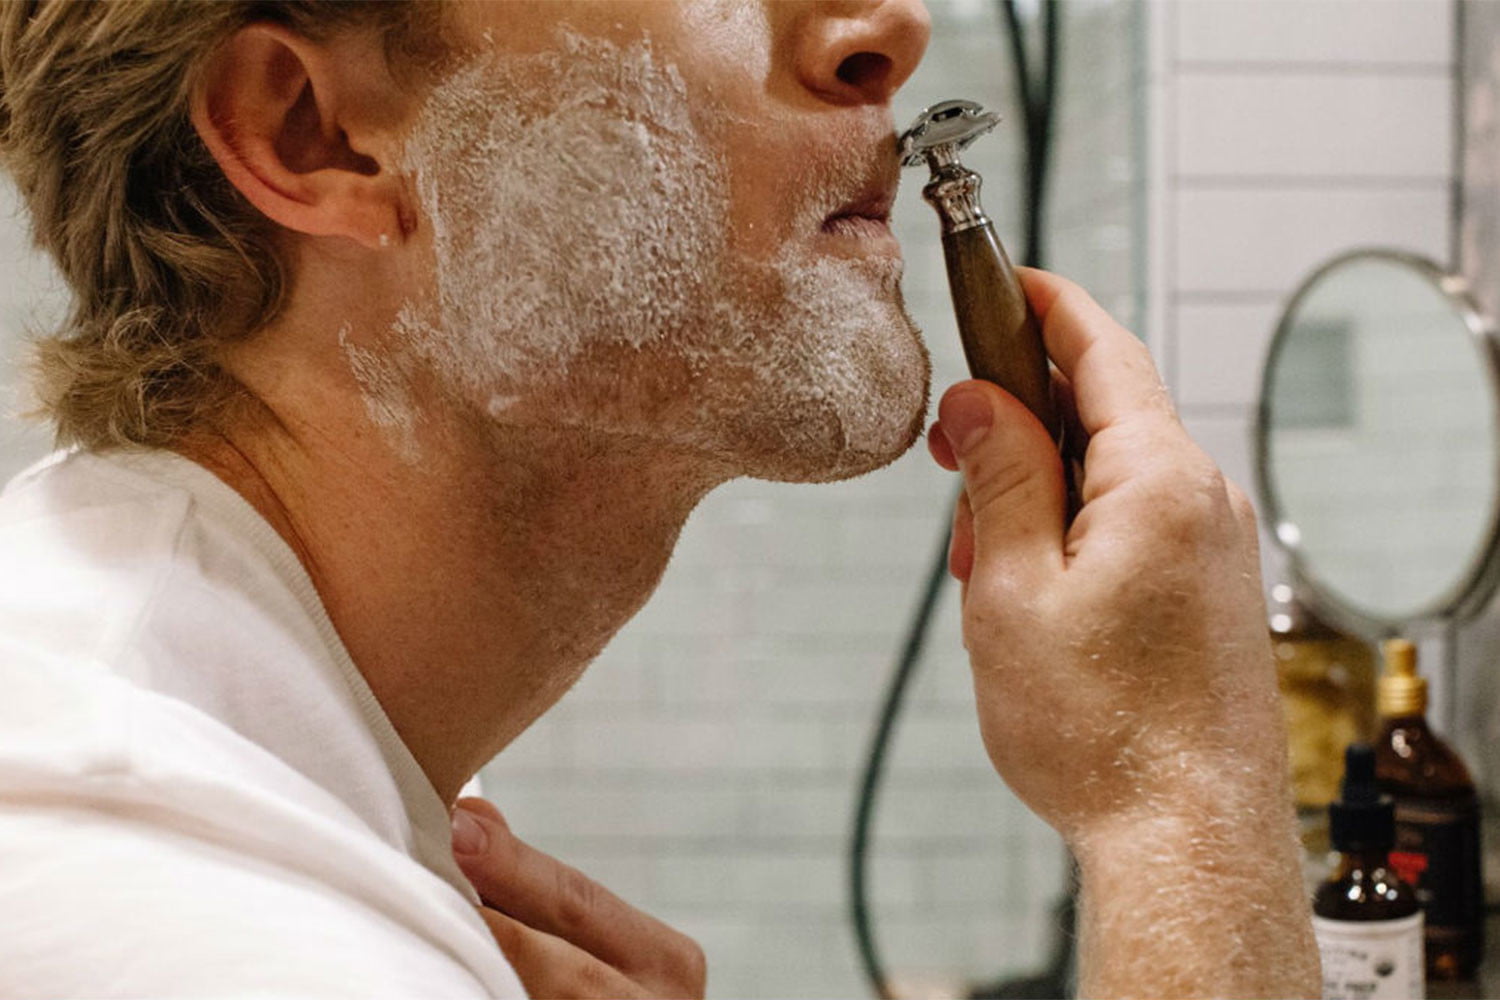 An Interview With A You Tube Shaving Superstar